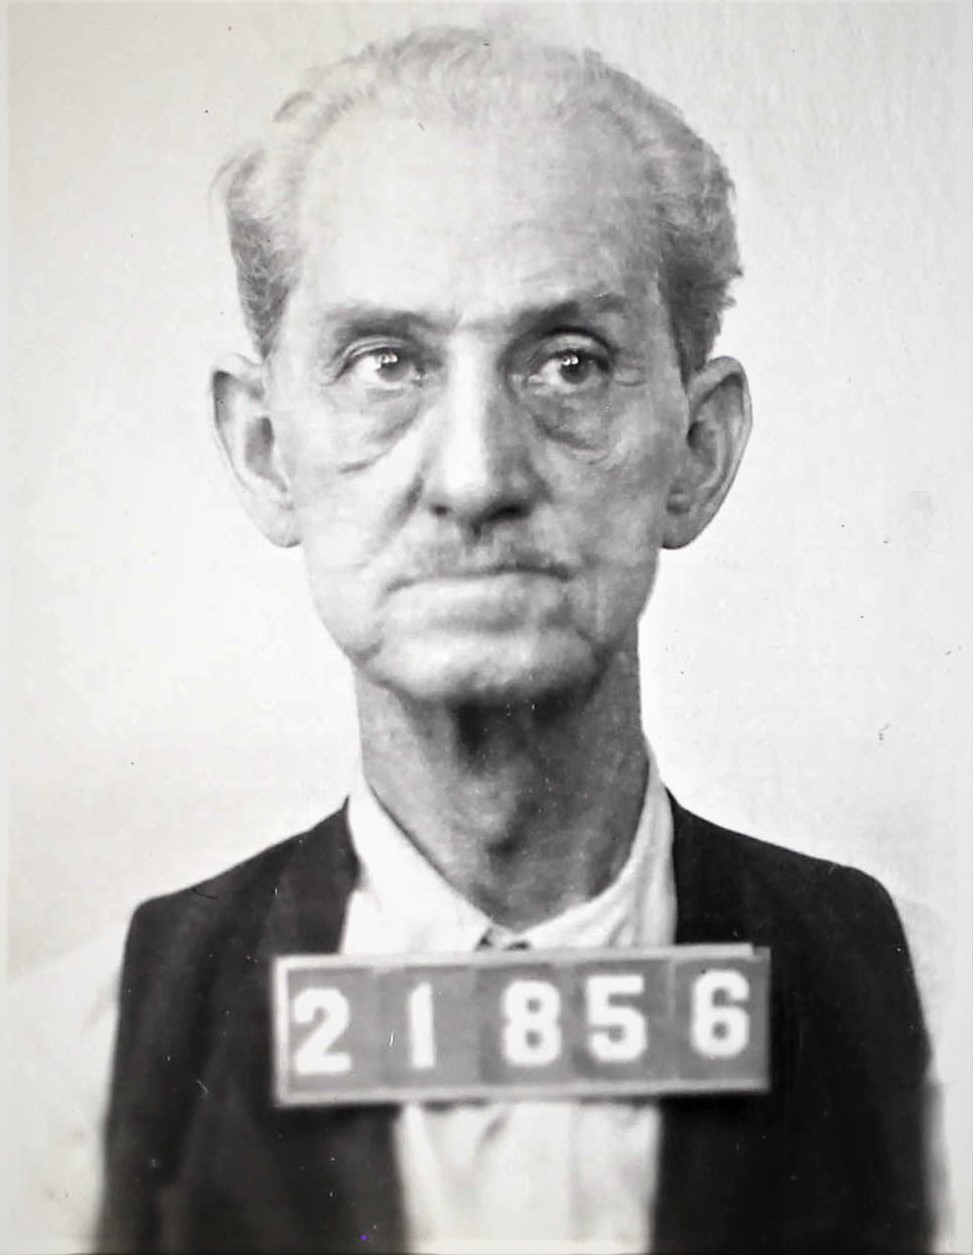 21856 numbers over mugshot of older man William Young.